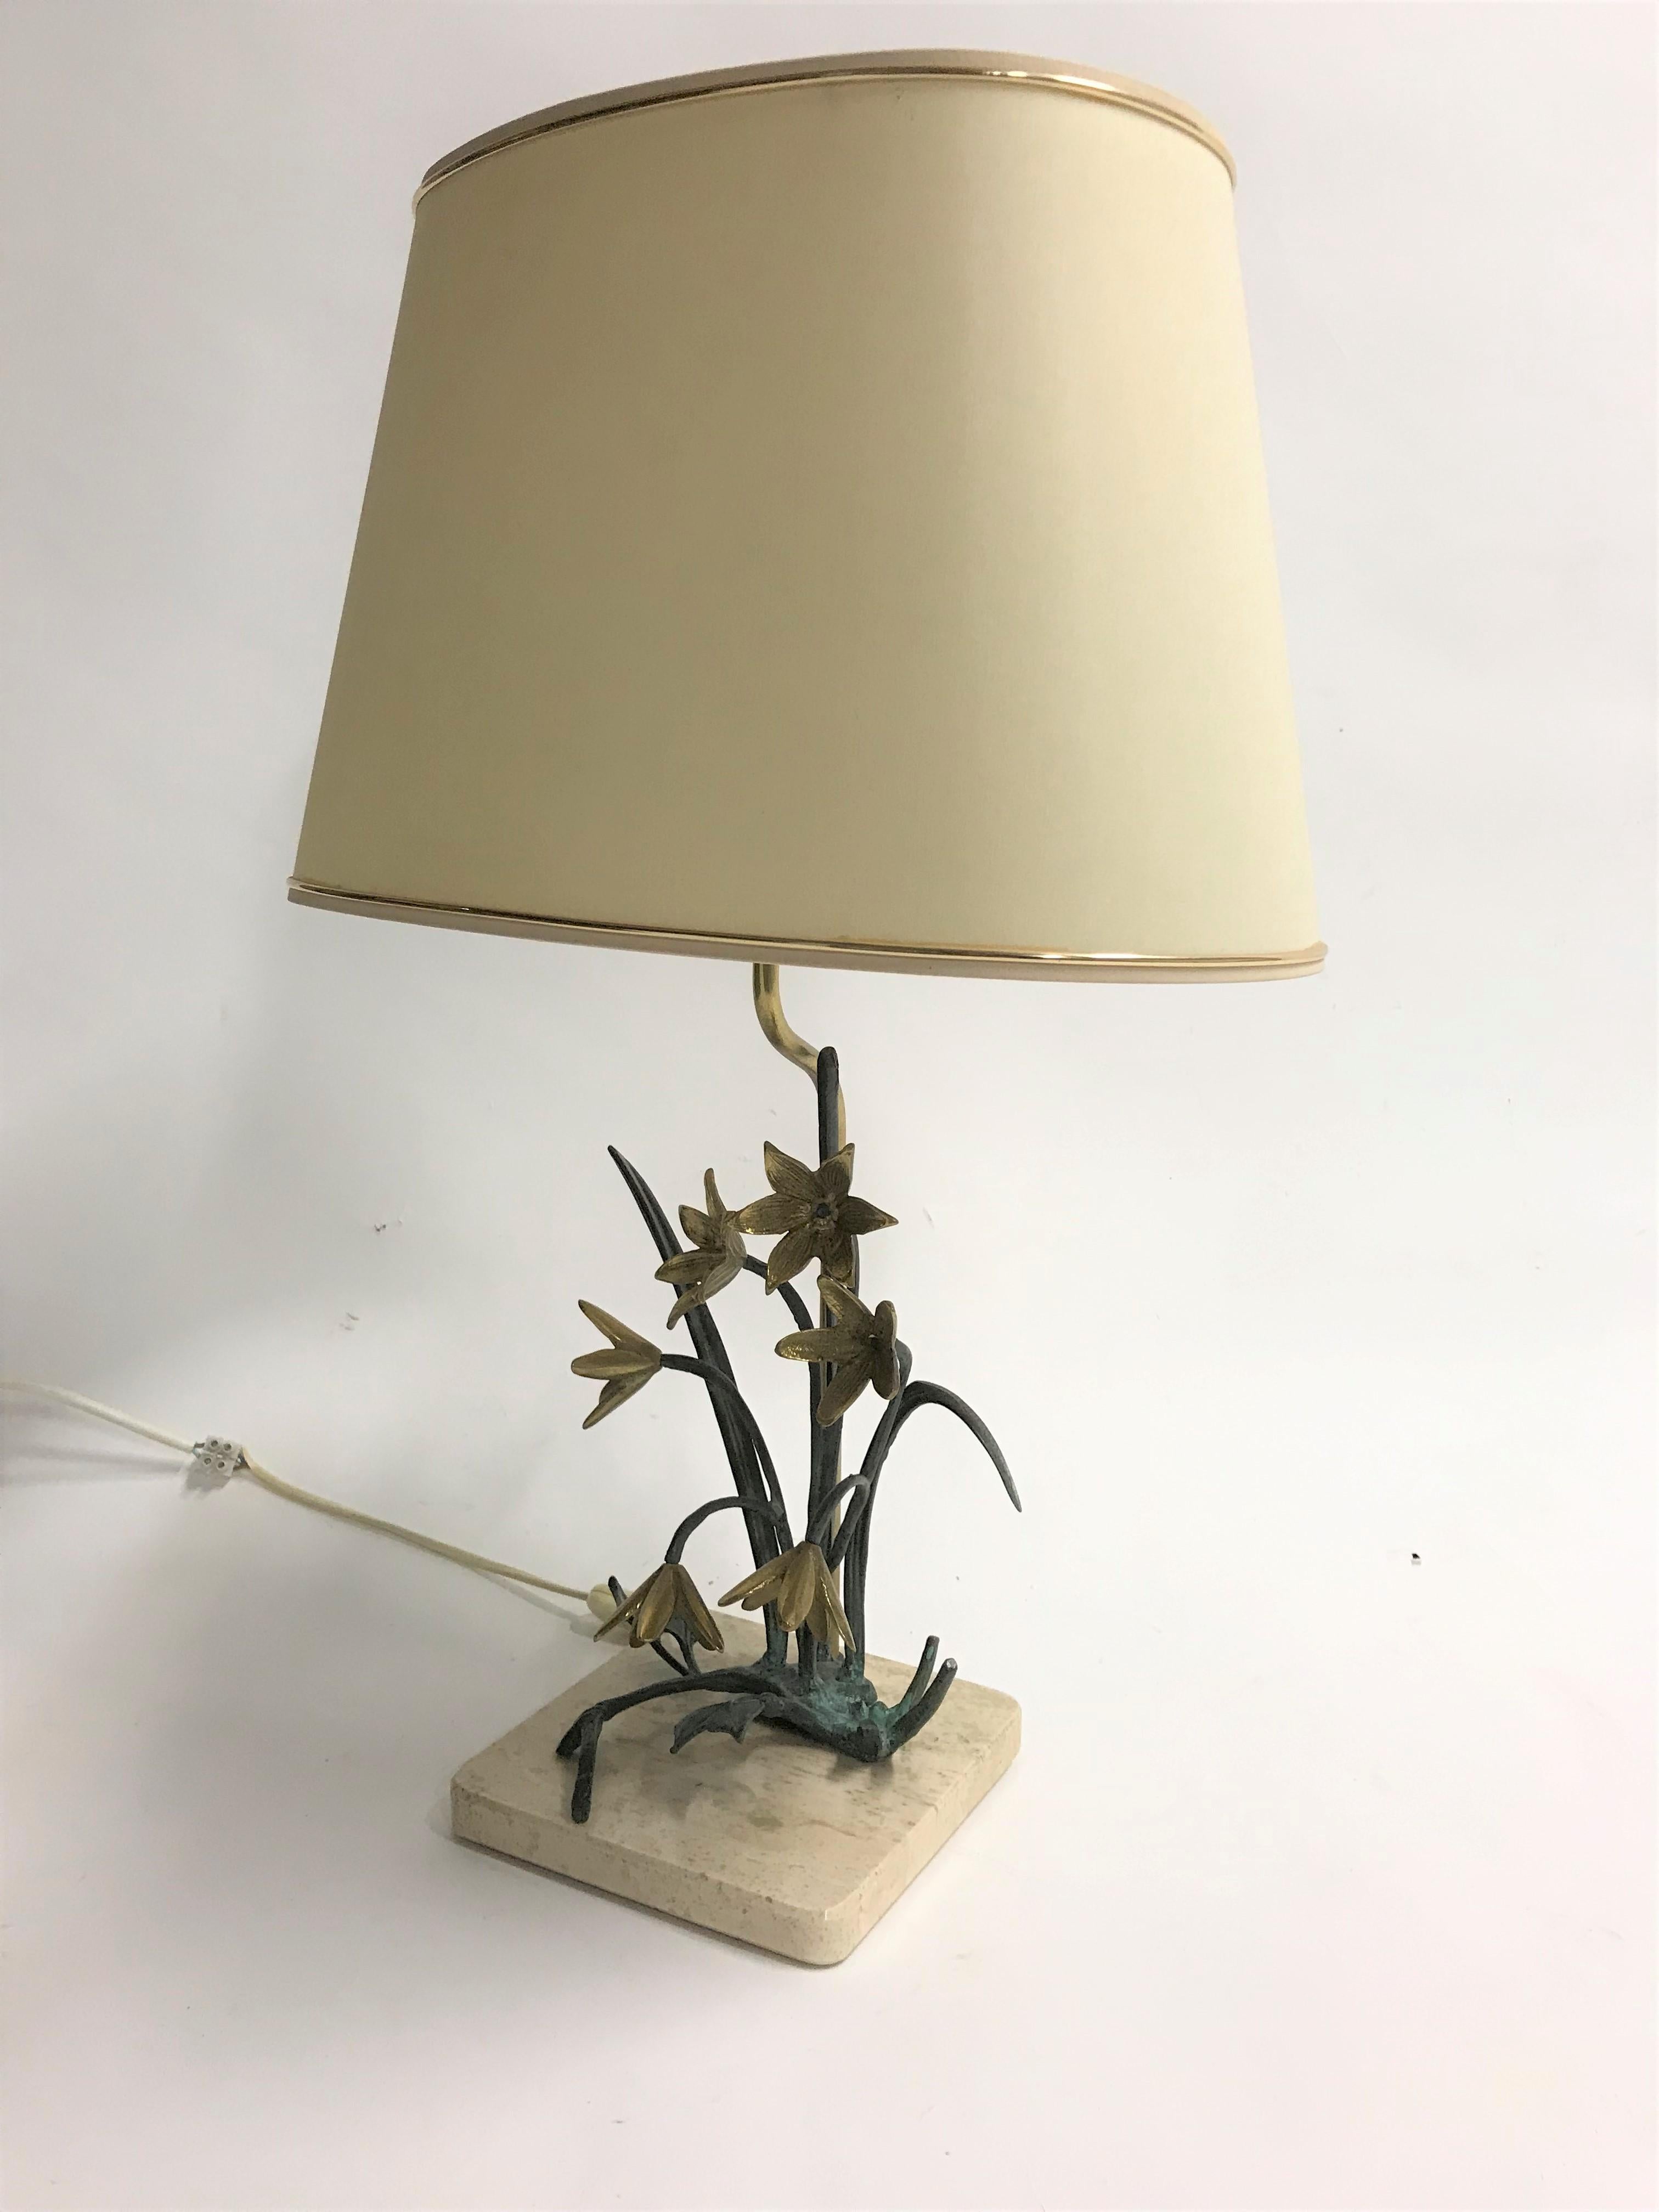 Beautiful sculptural bronze and brass flower table lamp mounted on a travertine stone base.

Well sculpted flowers and branches with eye for detail.

Tested and ready for use with a regular E26/E27 light bulb.

Comes with it's original lamp